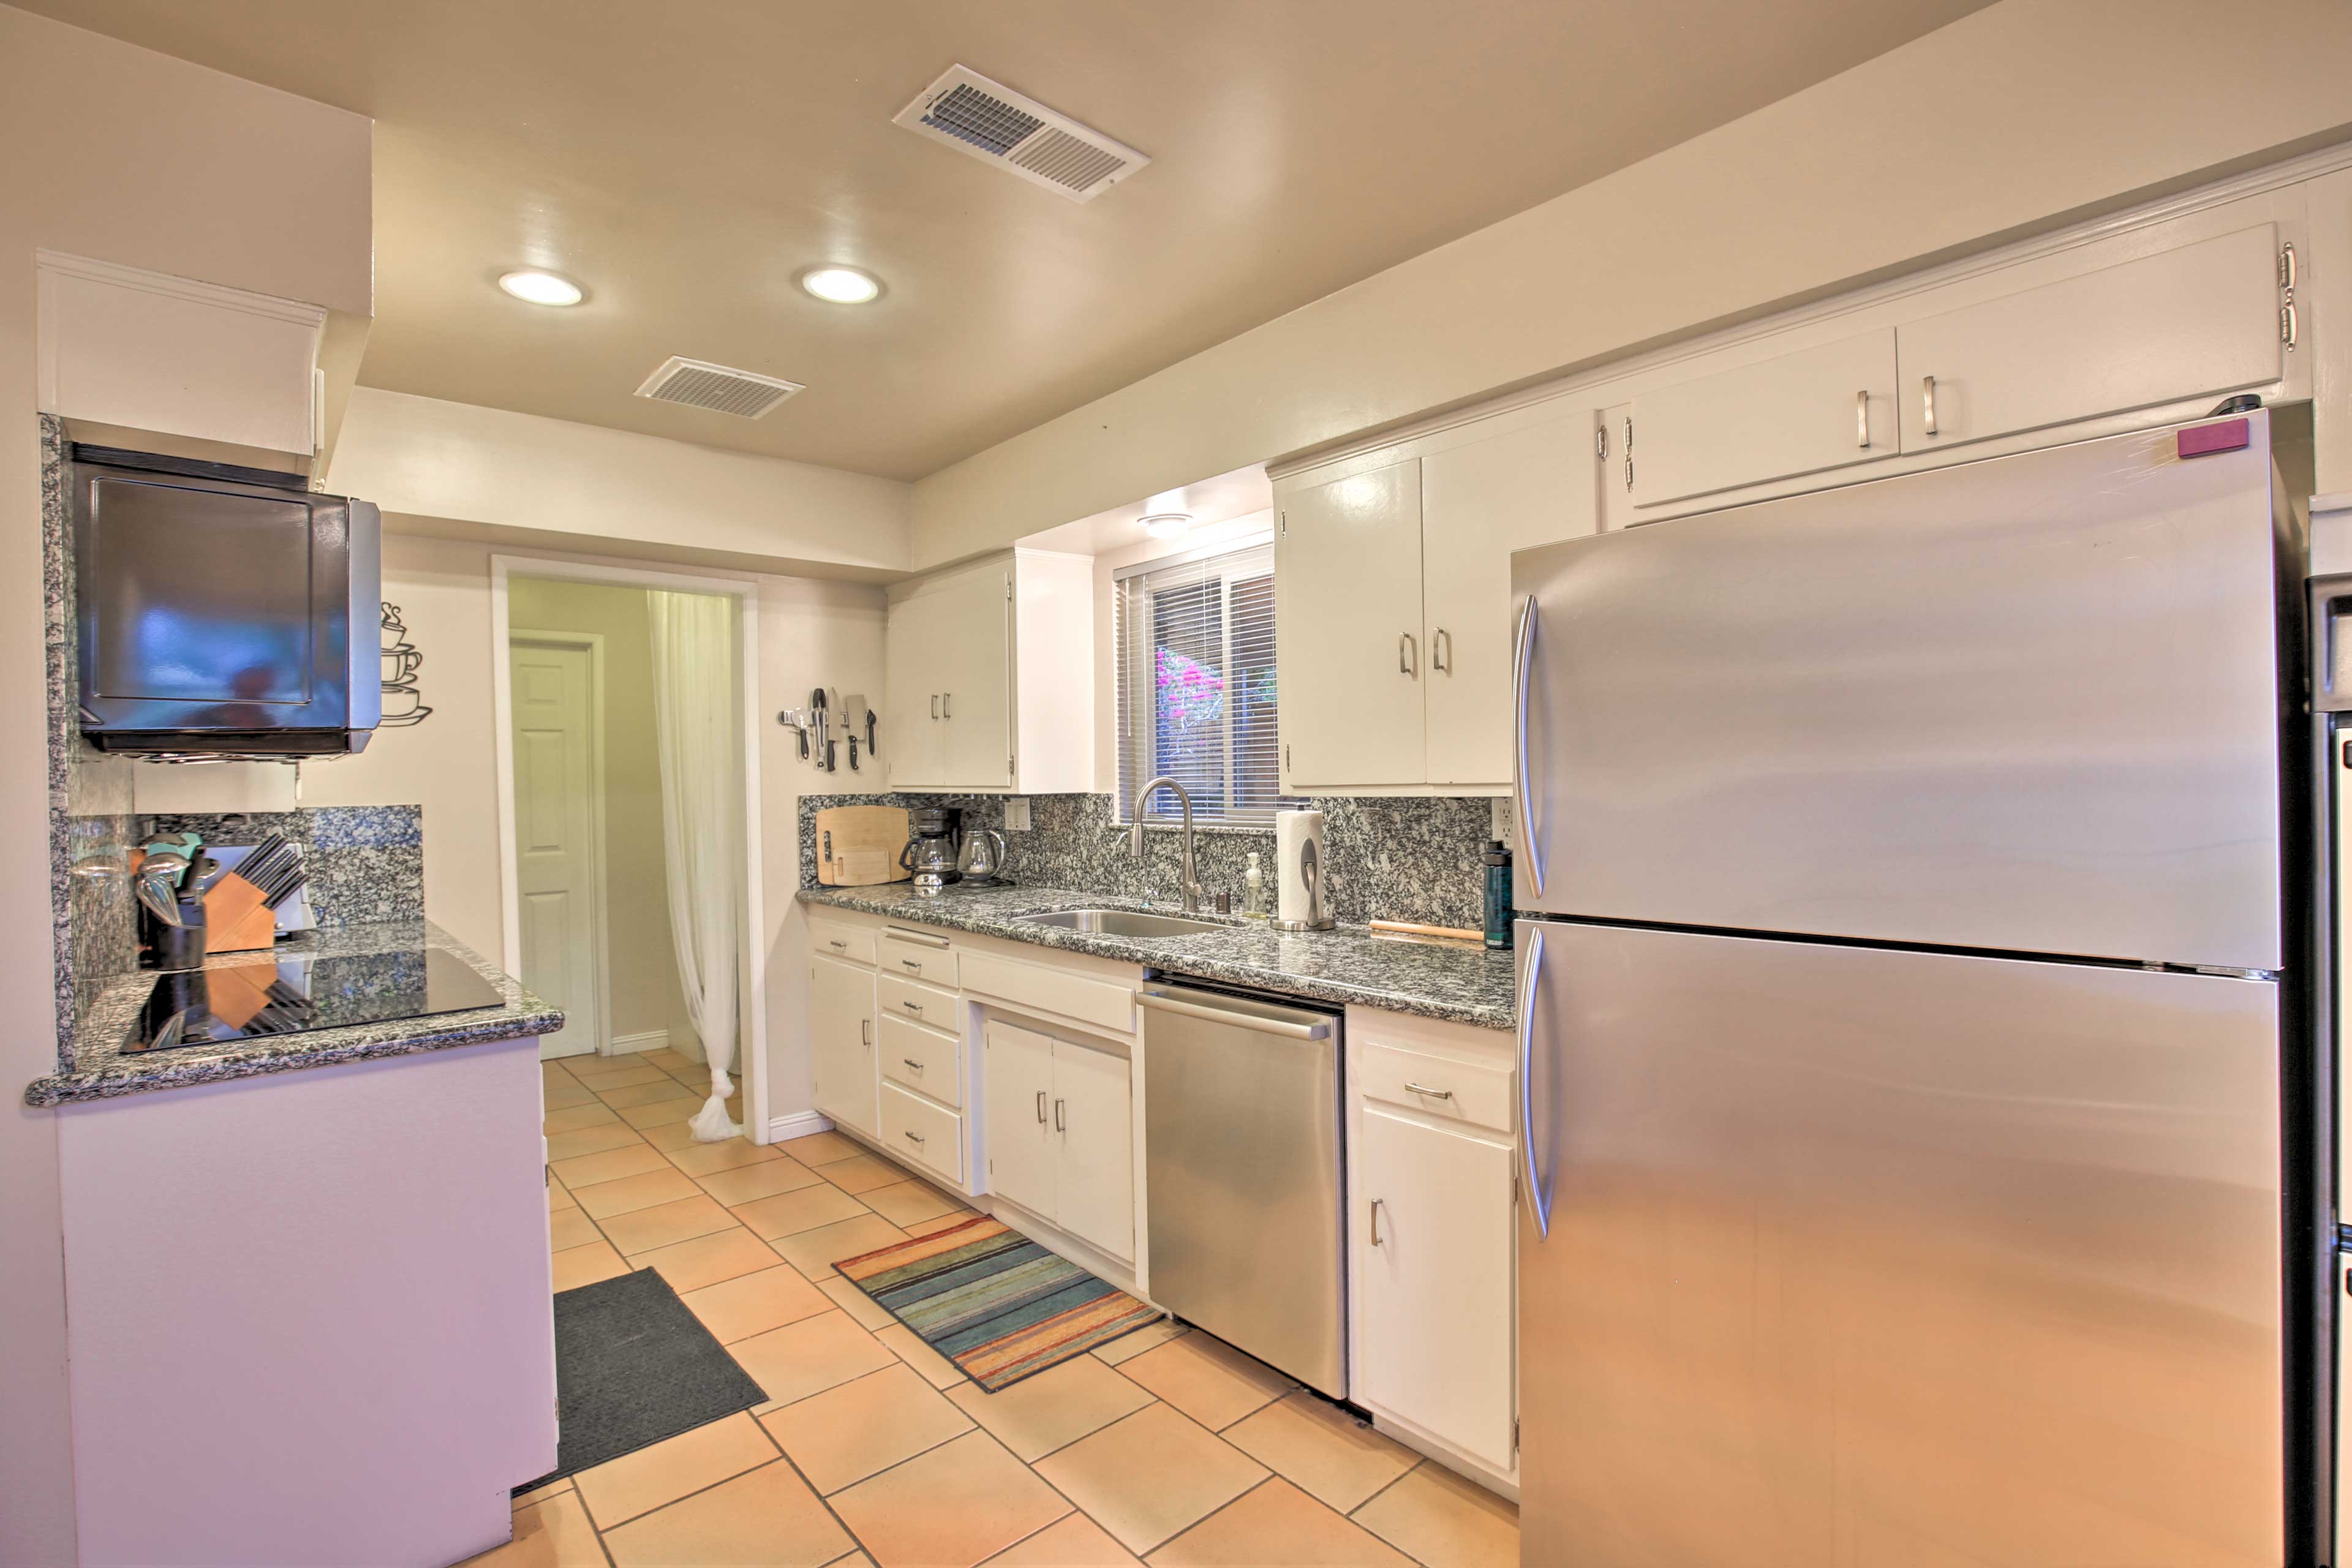 The kitchen comes fully equipped with stainless steel appliances.